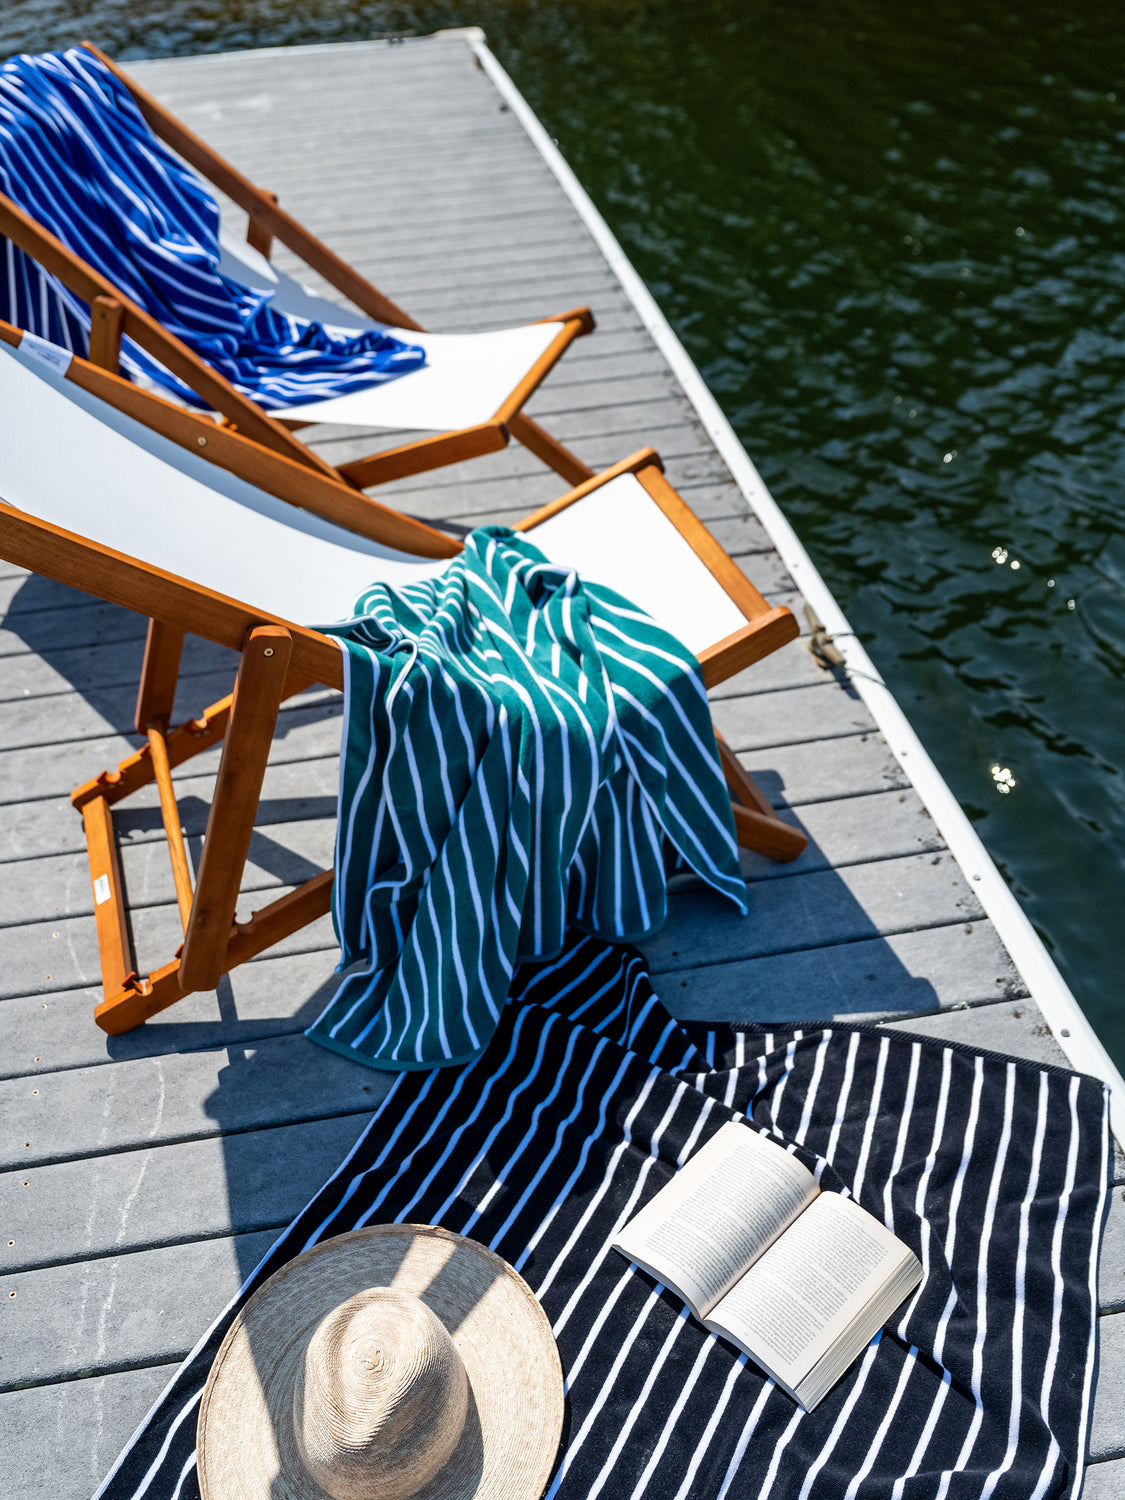 Green, blue, and black cabana towels with white stripes draped on sling canvas chairs on lake dock.